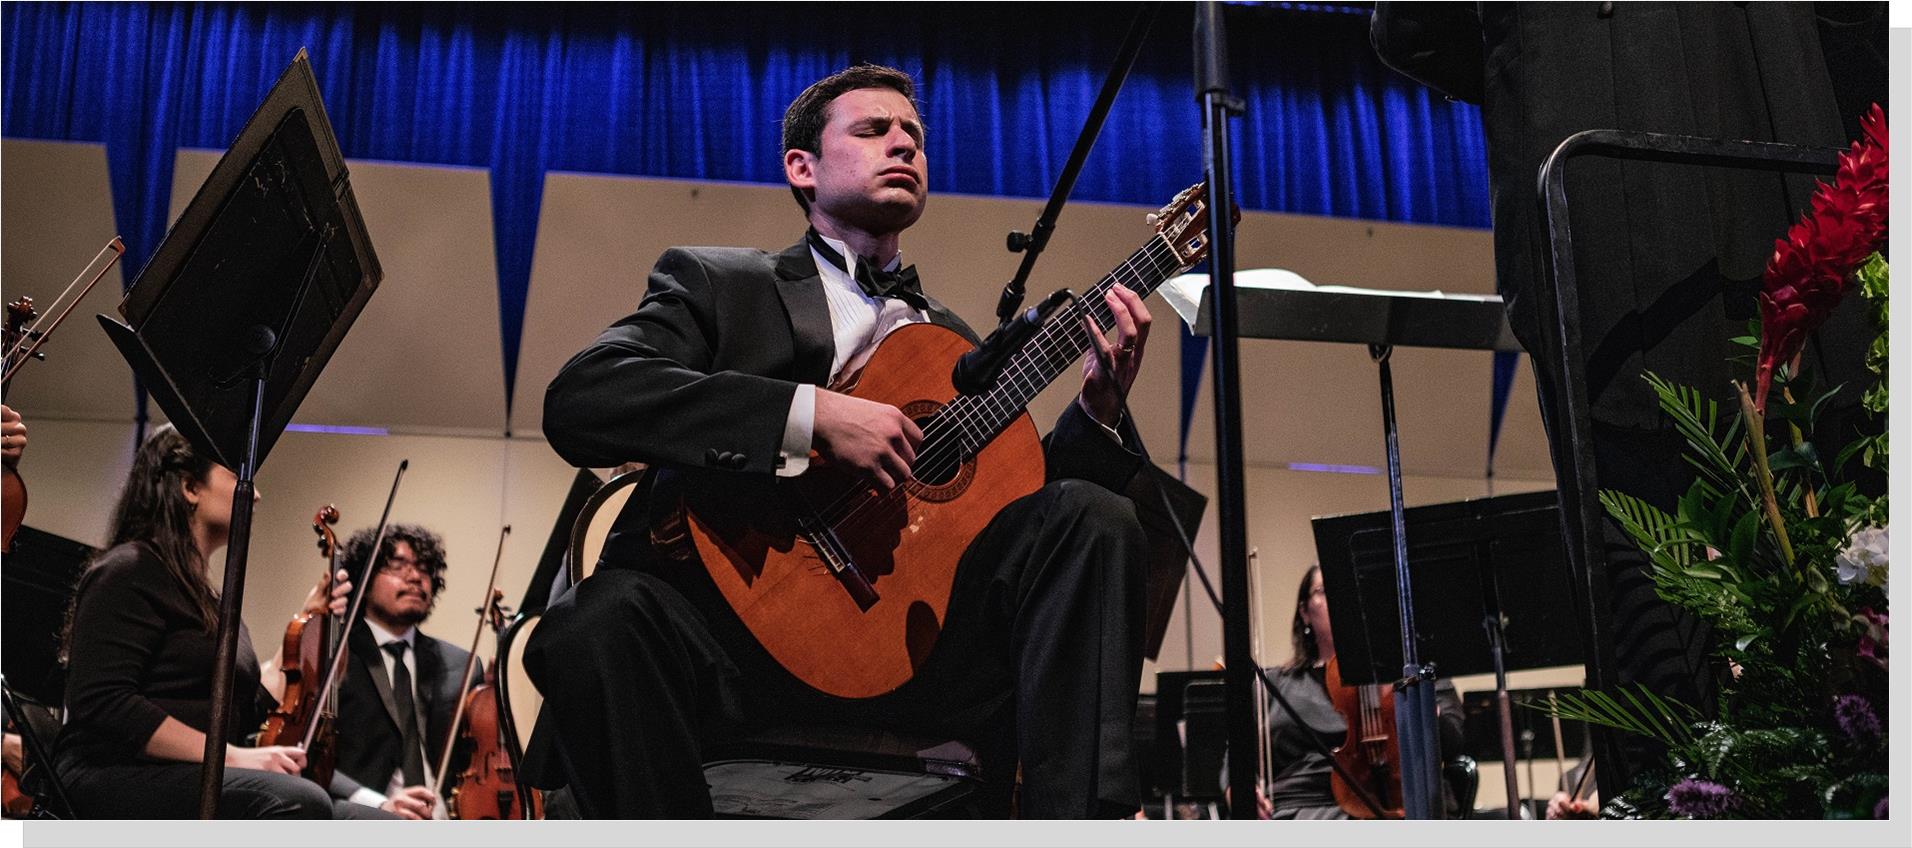 Matthew Trkula guitar performs with the NOVA Annandale Symphony Orchestra